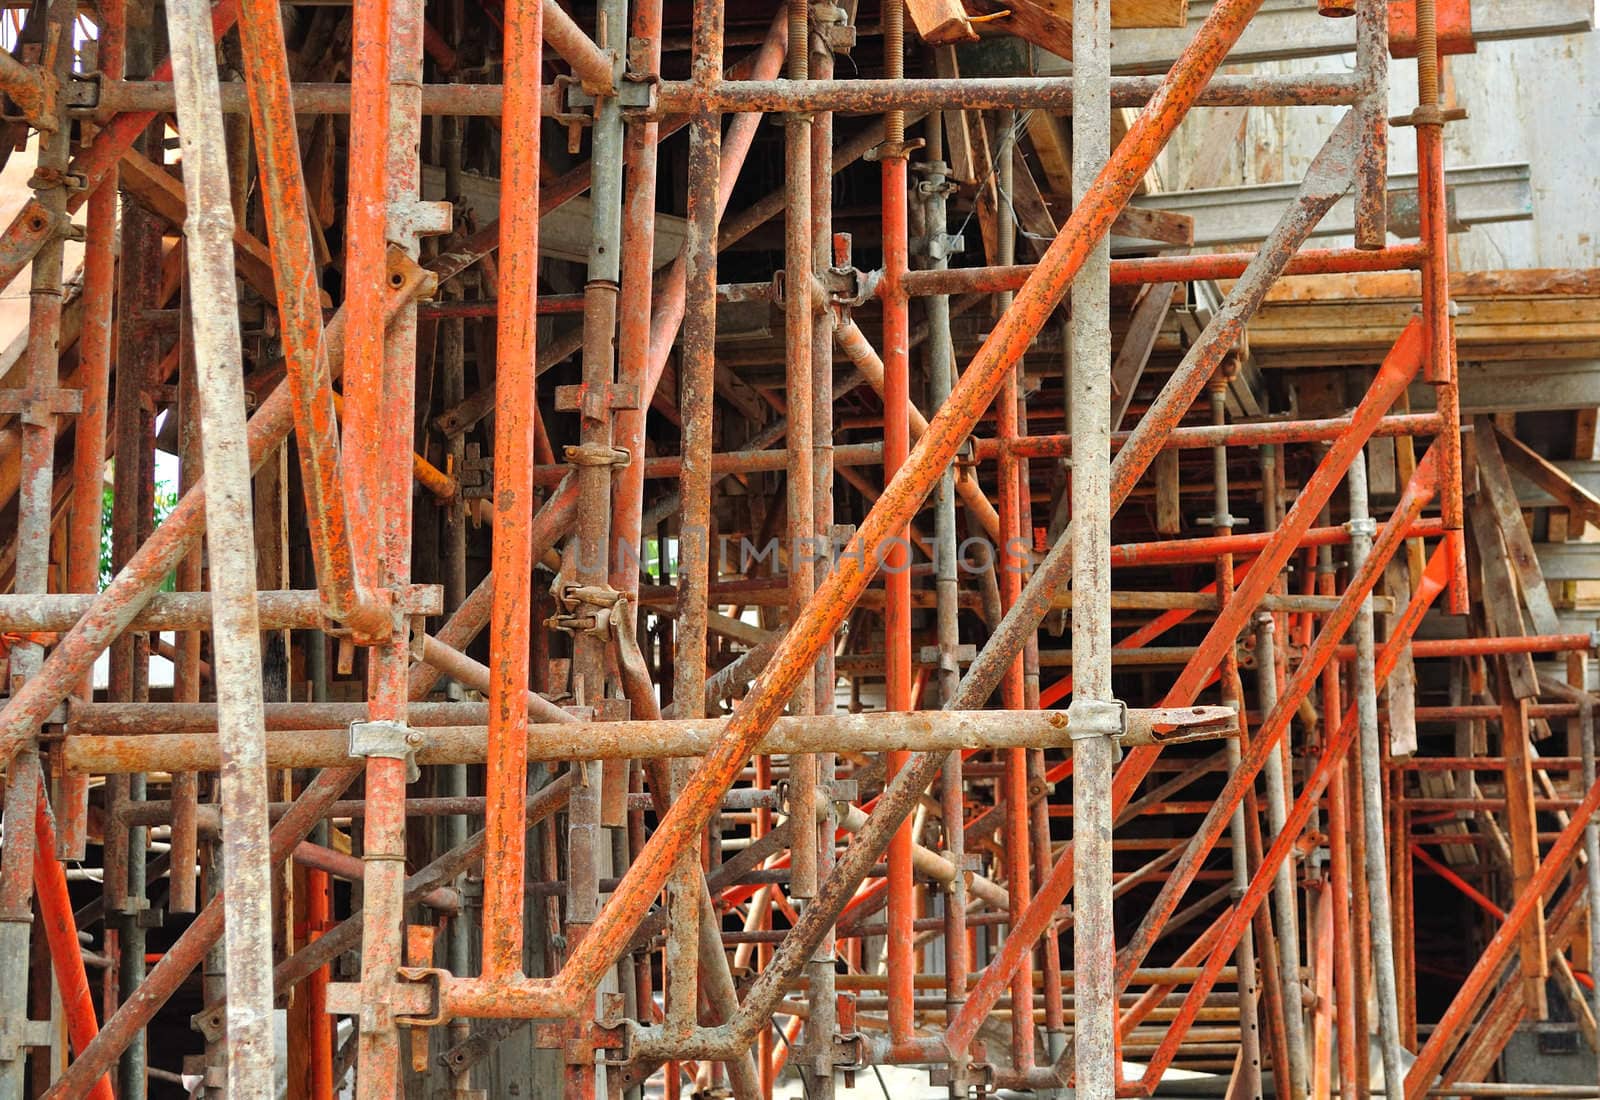 Metal scaffold used in building construction